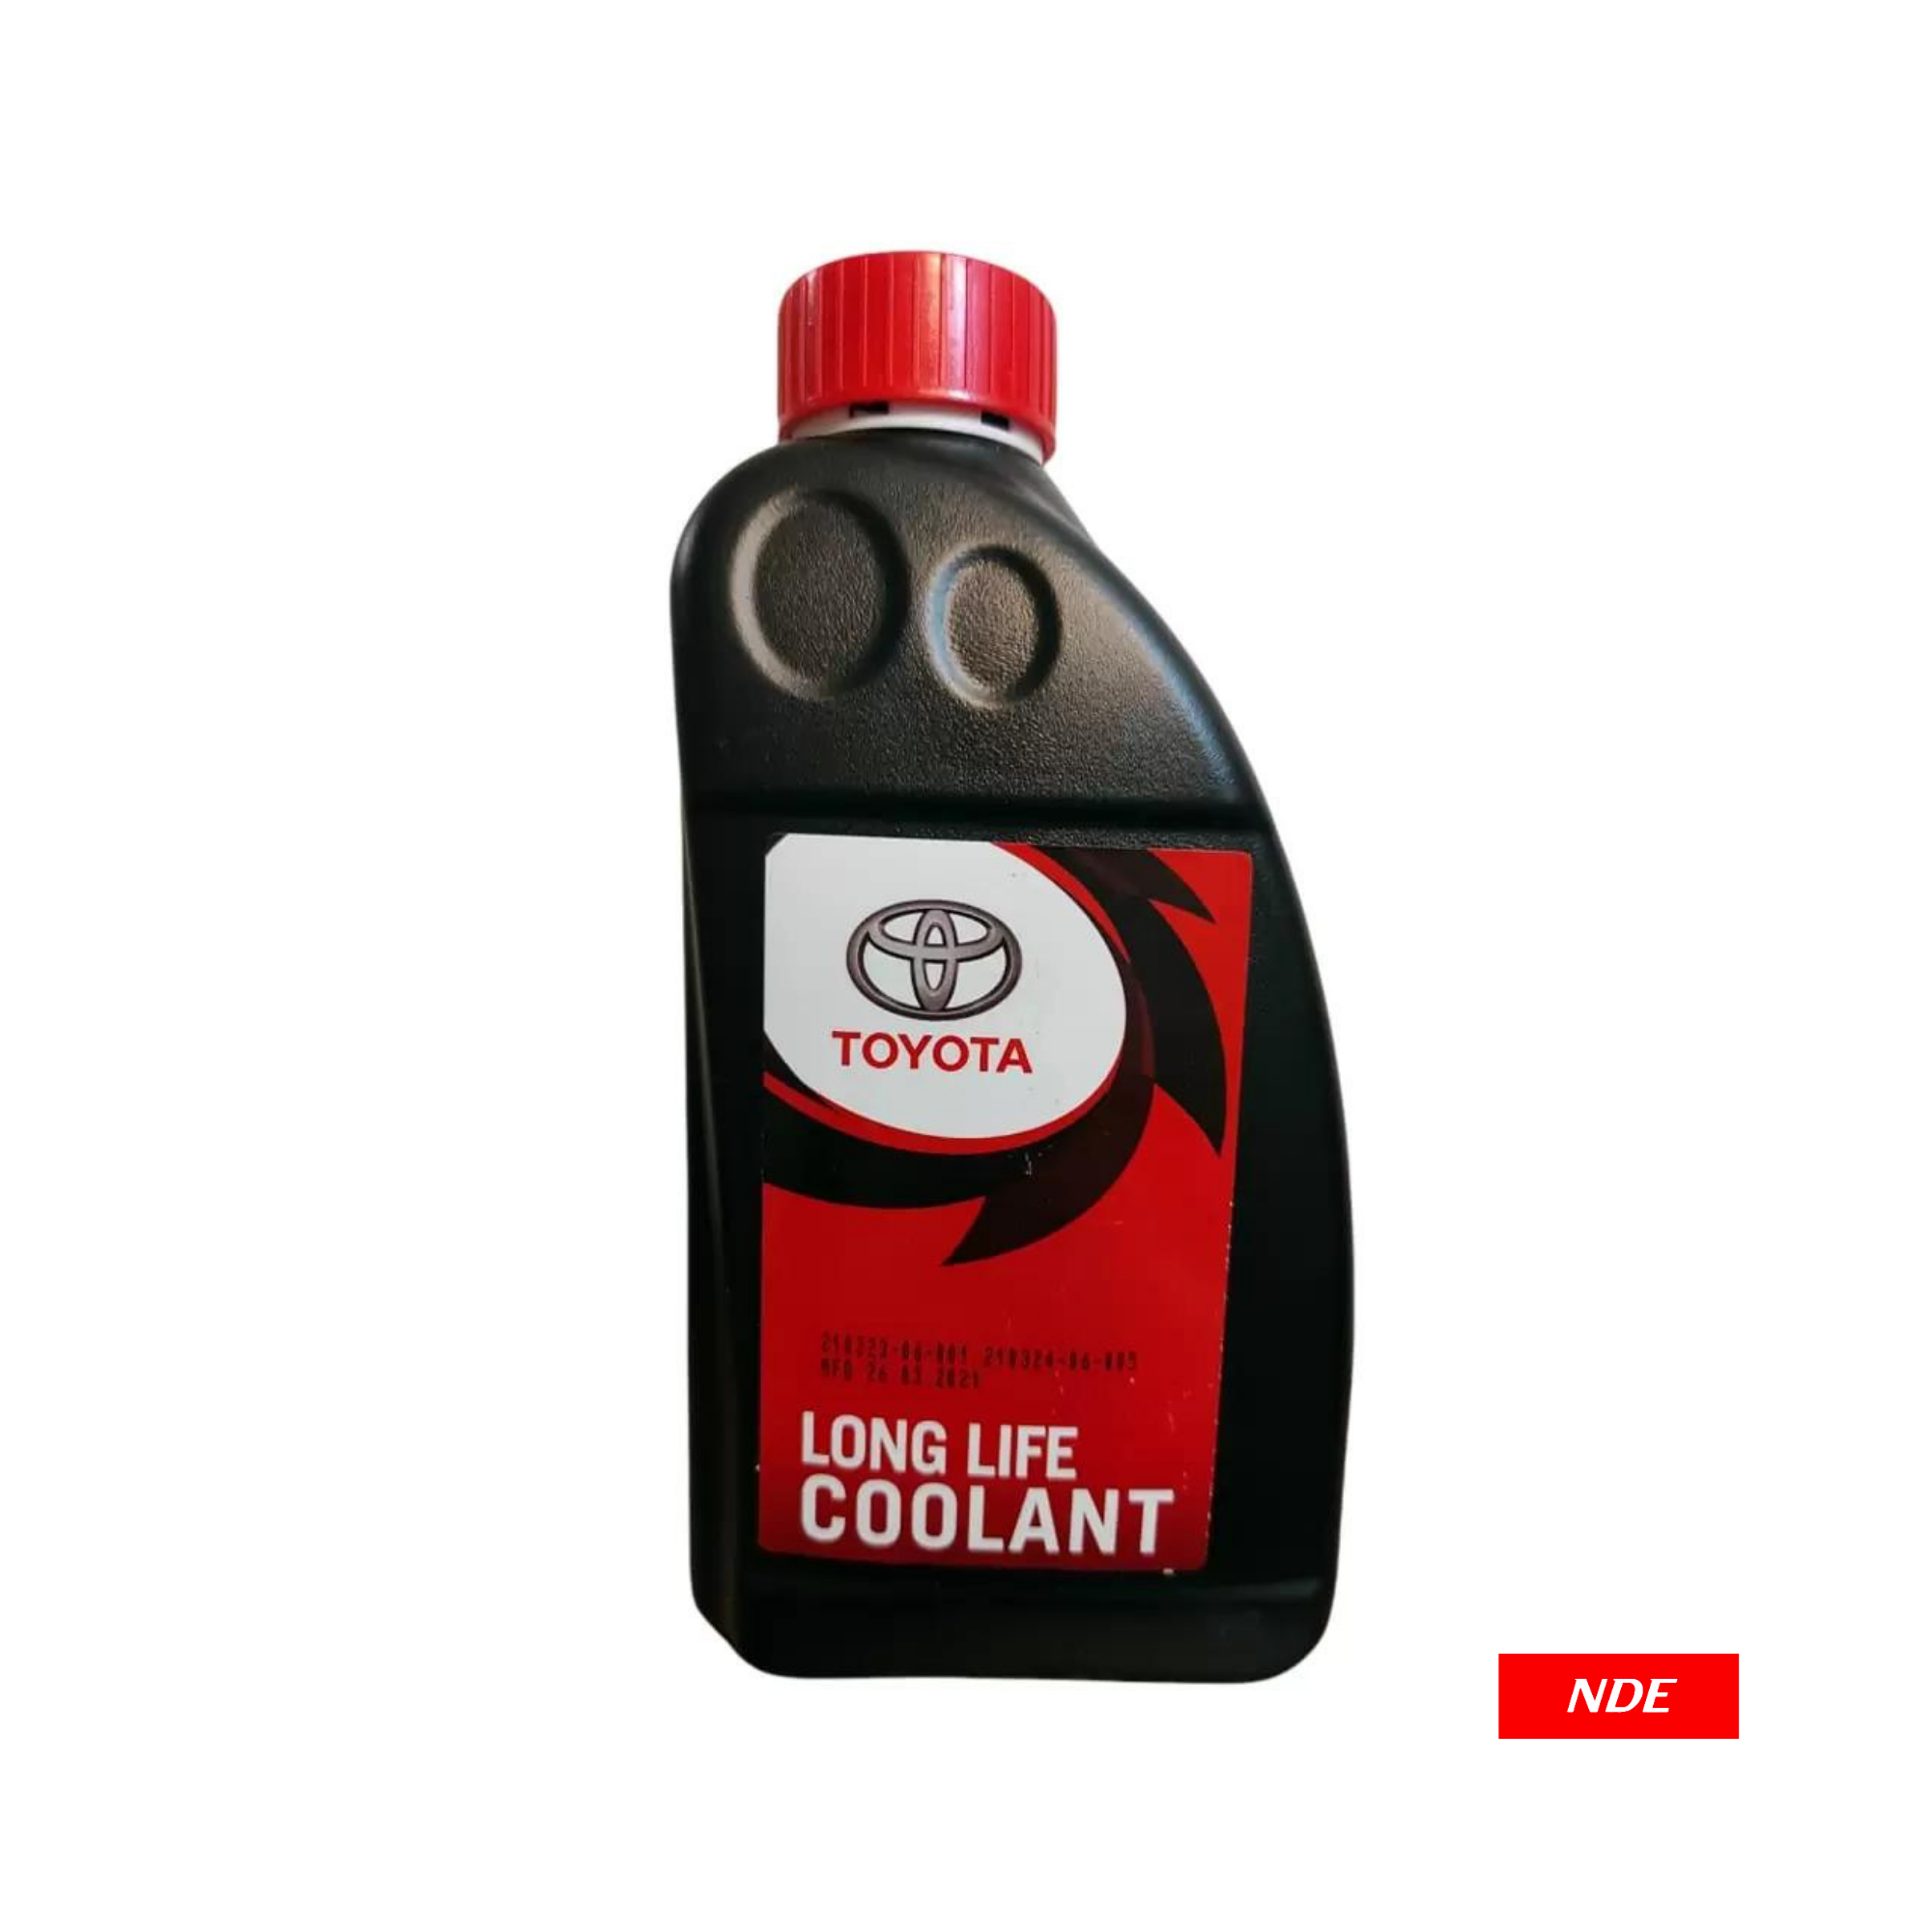 RADIATOR COOLANT SUPER LONG LIFE COOLANT 1 LTR - TOYOTA GENUINE (MADE IN THAILAND)